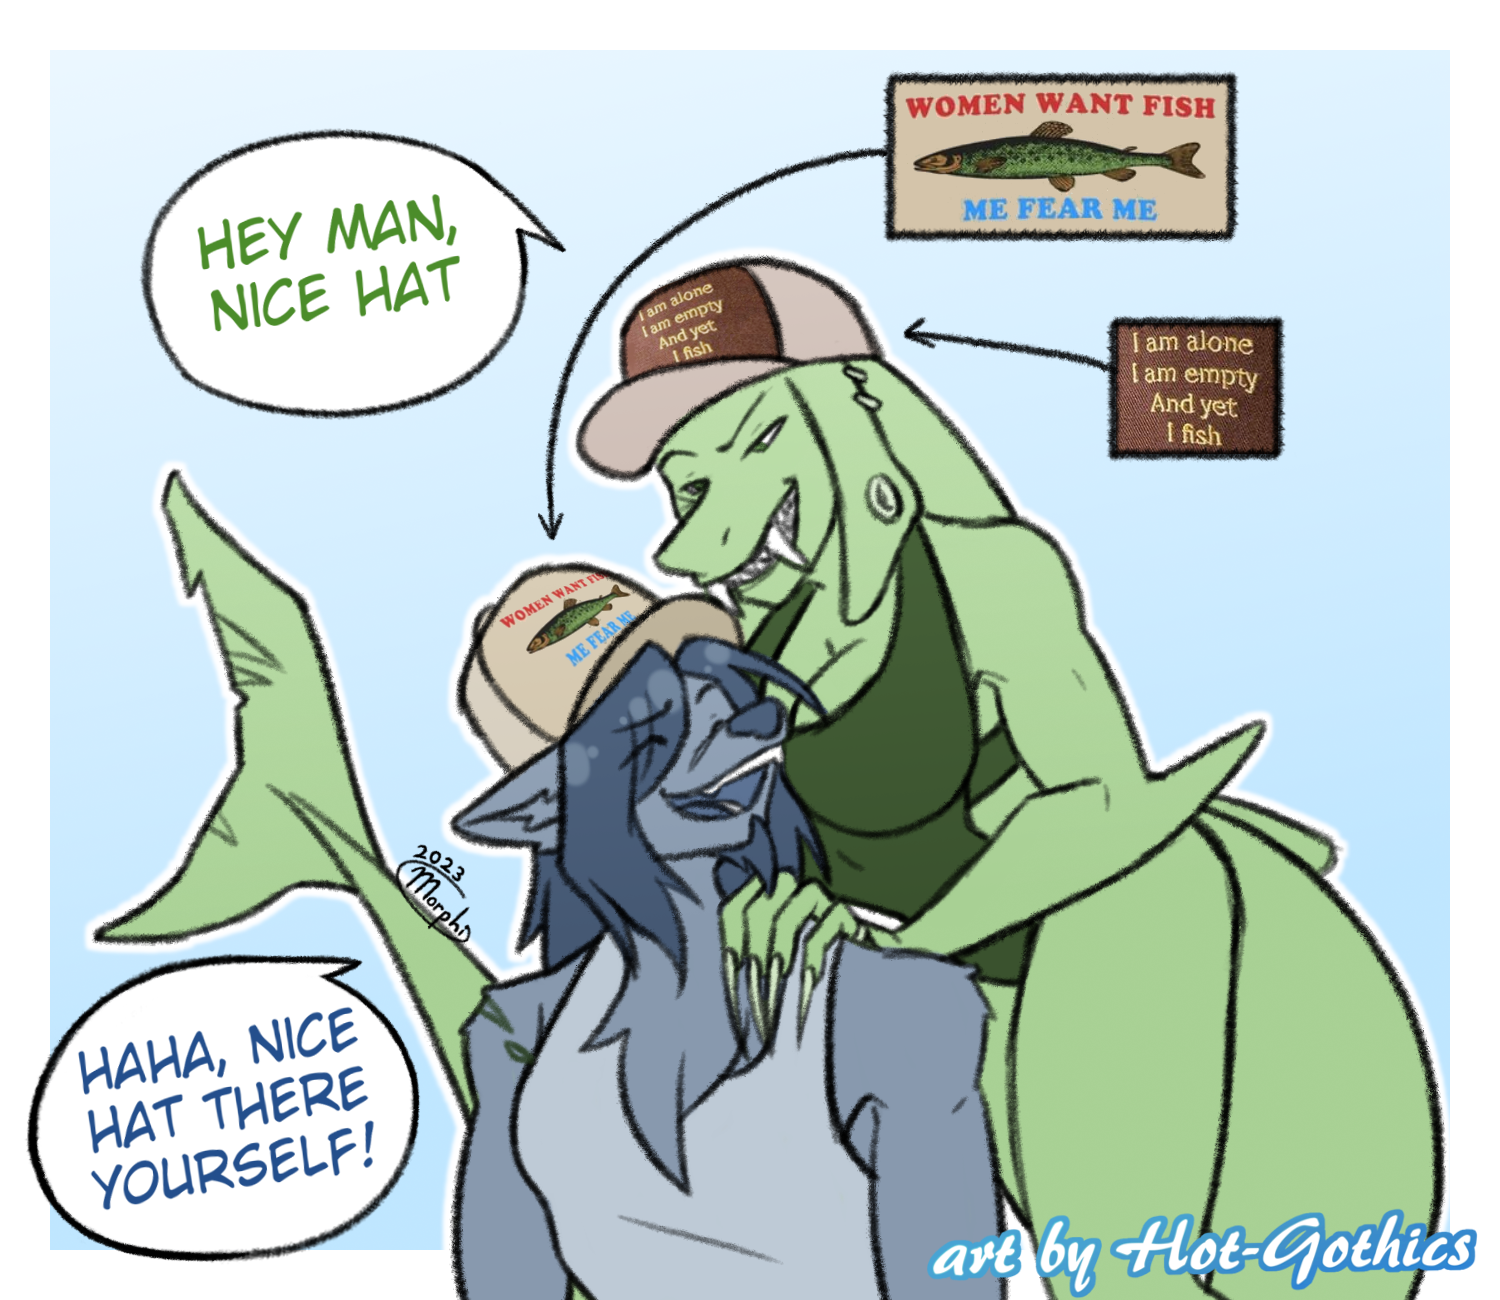 Funny Fish Hat Connoisseurs by hot-gothics -- Fur Affinity [dot] net